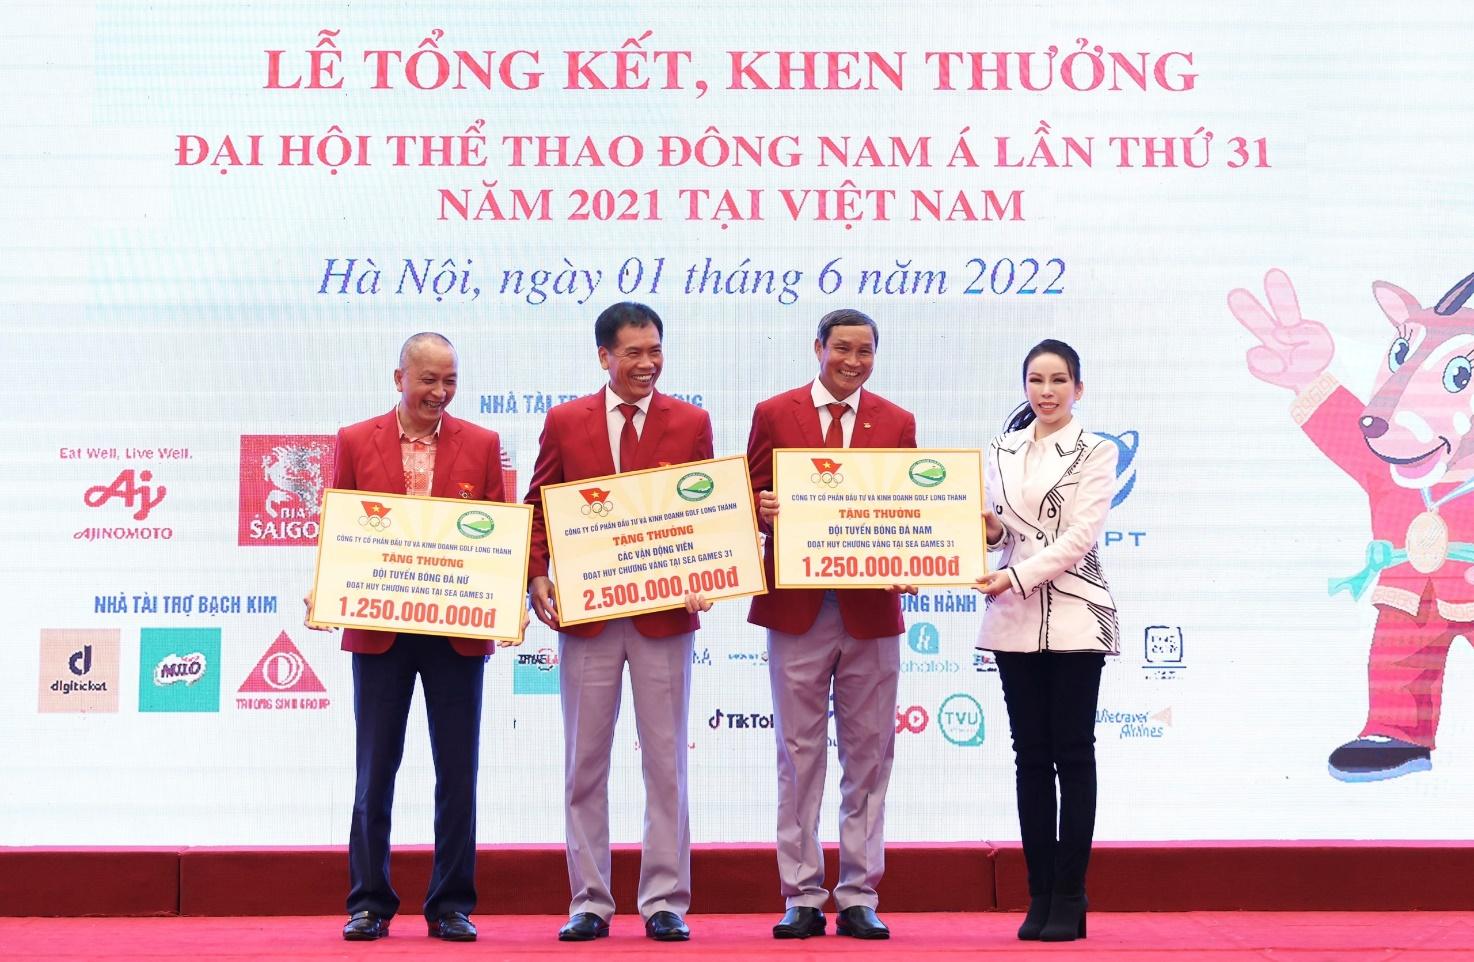 Golf Long Thanh awarded 5 billion VND to athletes with excellent achievements at SEA Games 31 - Photo 1.